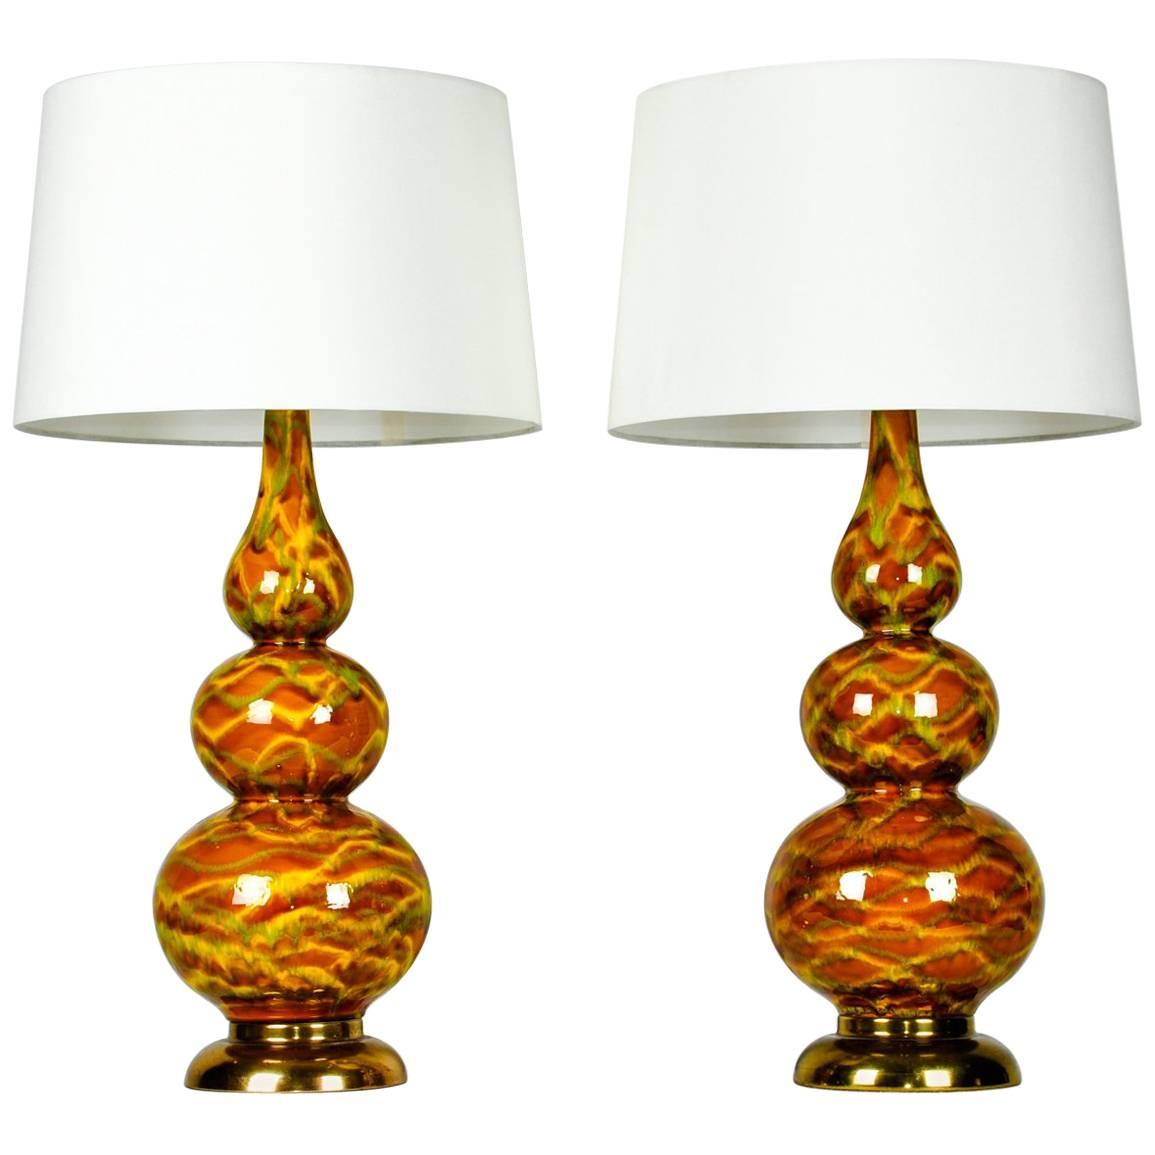 Vintage Porcelain Pair of Table Lamps with Brass Base